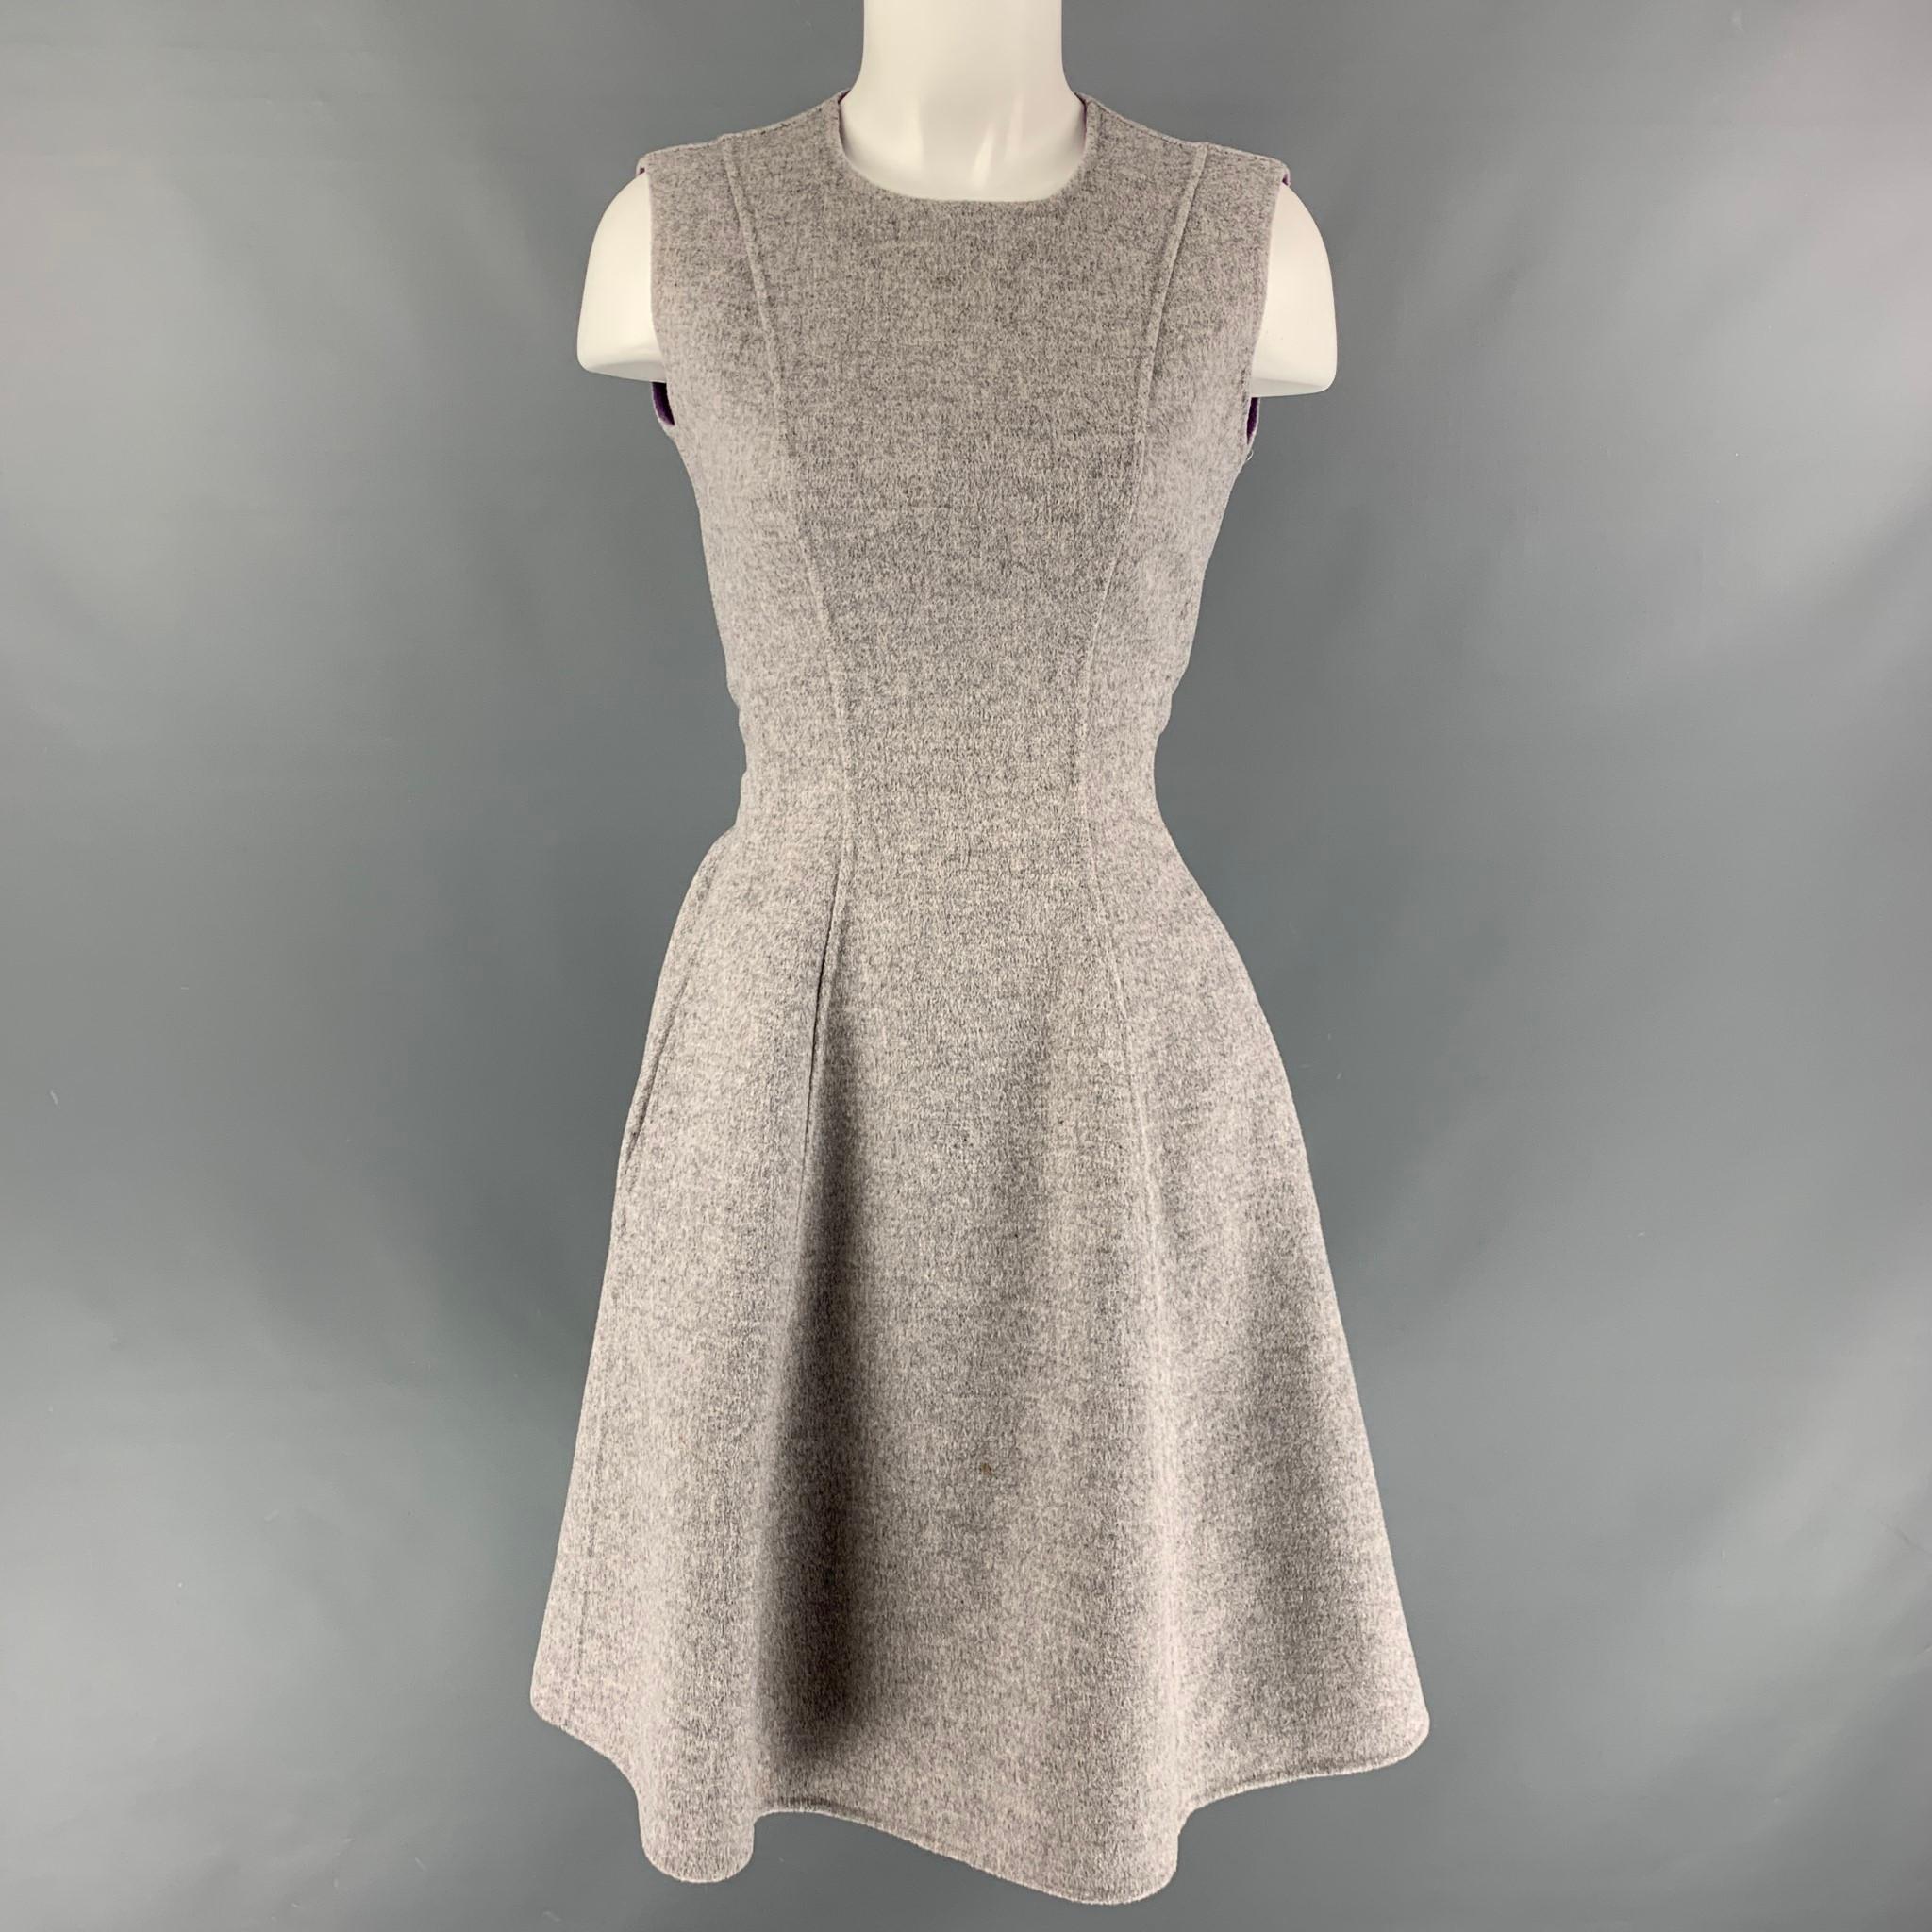 CAROLINA HERRERA dress comes in a grey and purple heather wool fabric featuring two pockets, sleeveless style, a-line silhouette, belt at back and full back zipper closure. Matching coat also available.

Very Good Pre-Owned Condition.
Marked: